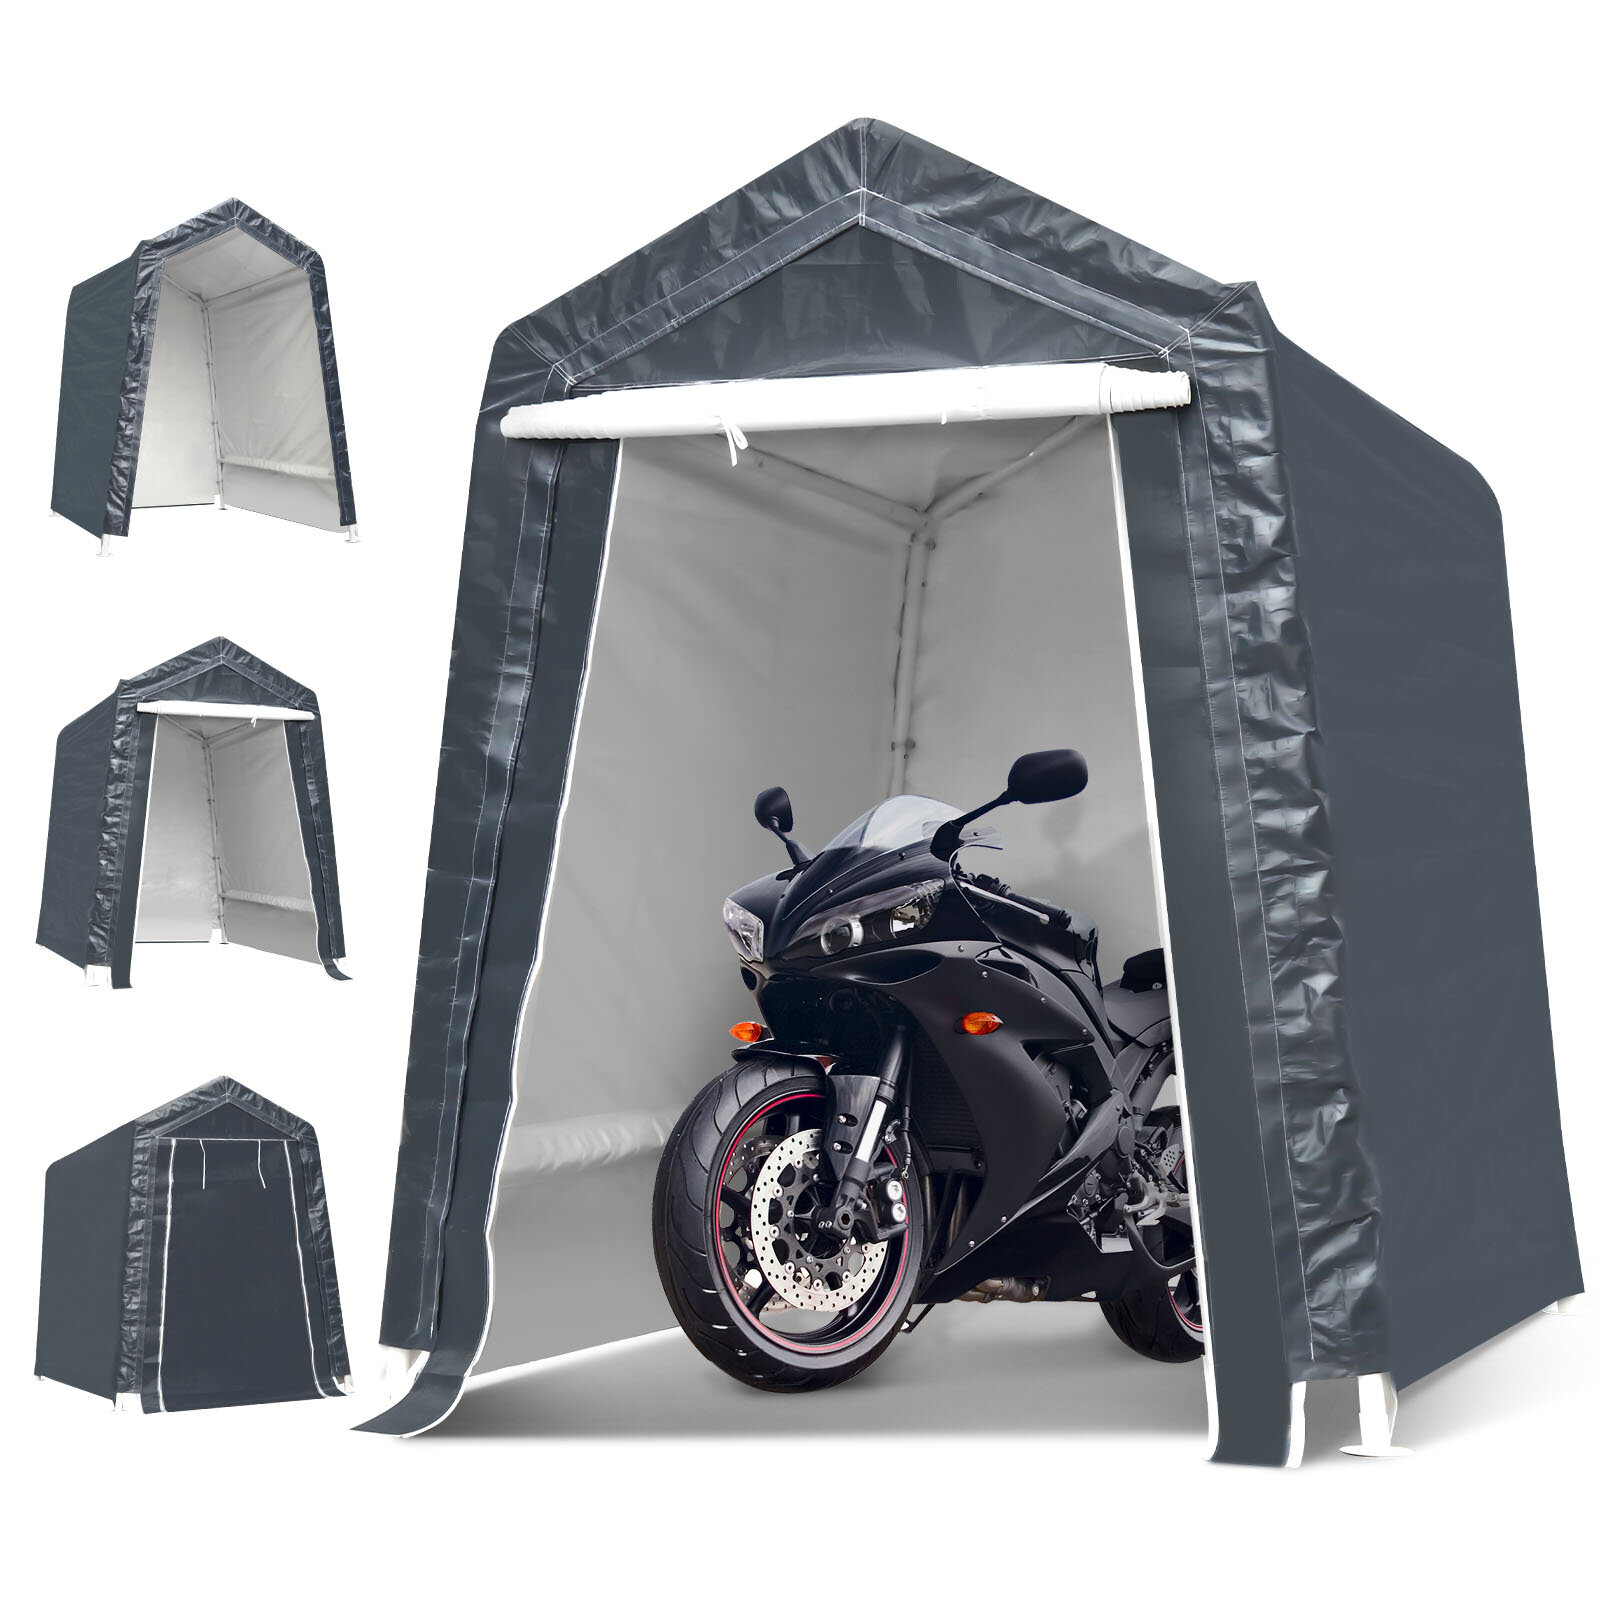 Image of 6x8x7 Ft Motorcycle Carport Portable UV Water Proof Cover Storage Sheds Camping Tent Canopy Shelter Garden Patio